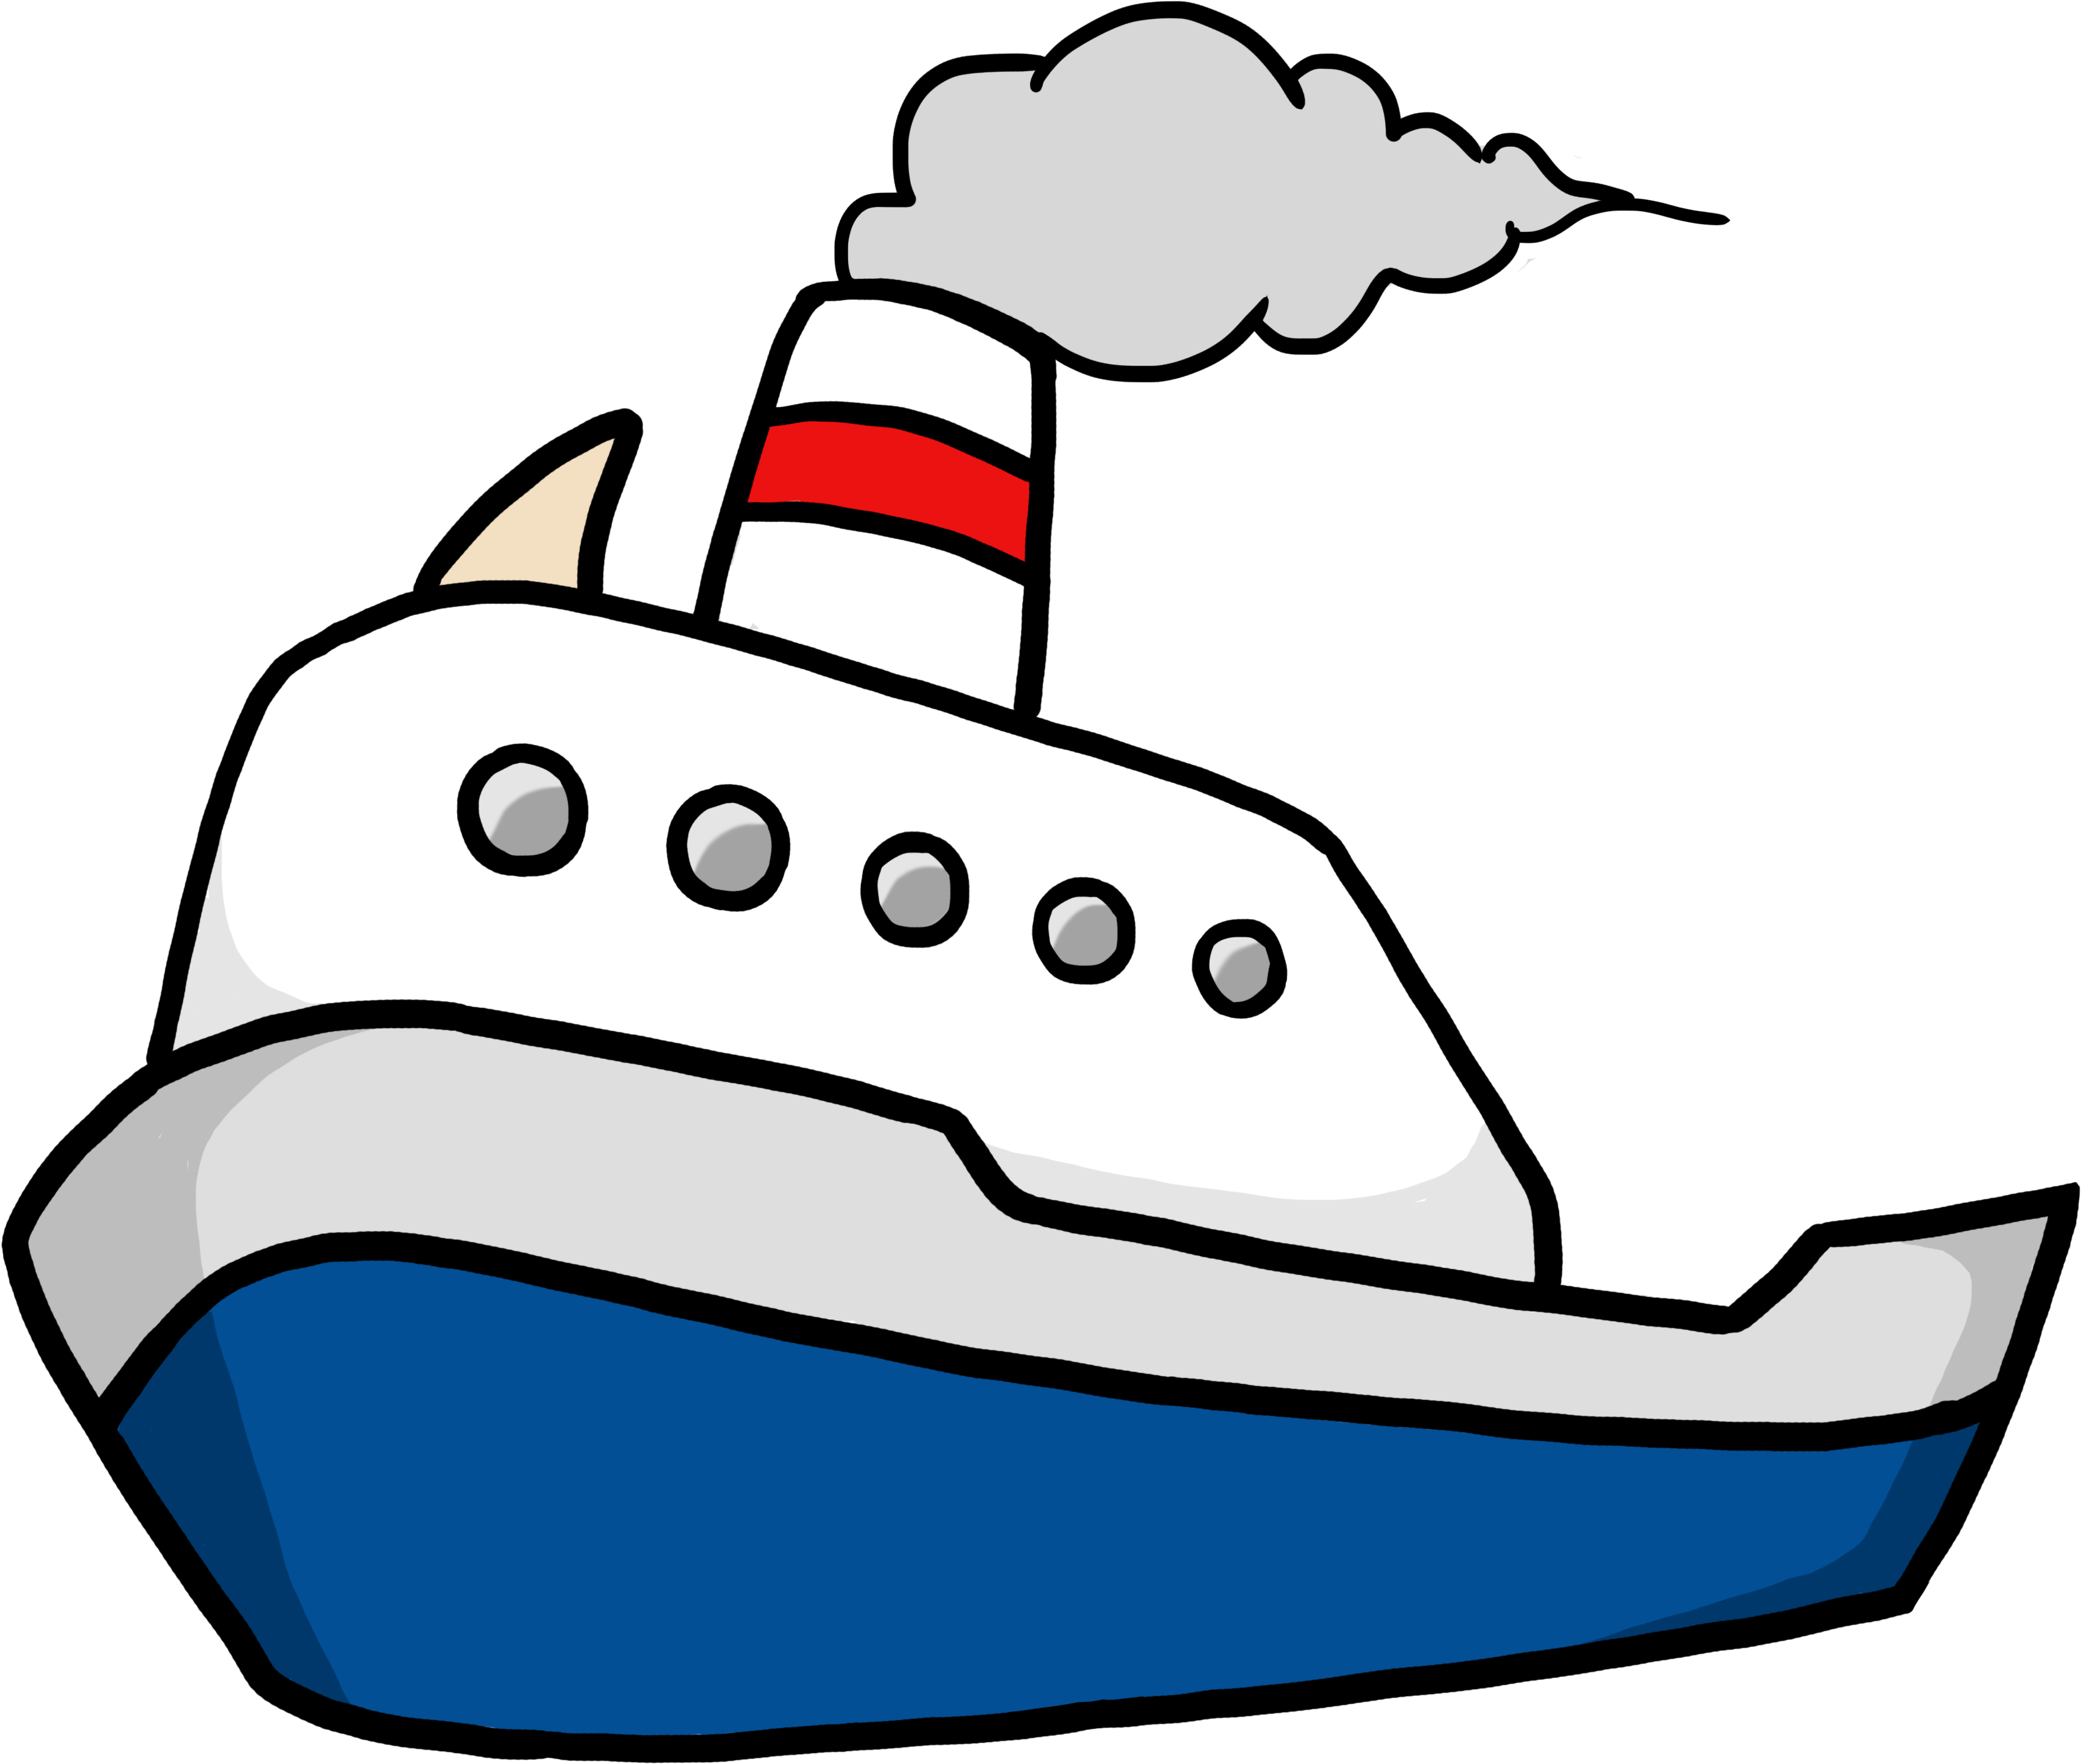 Ship clip art free. Intolerable acts clipart boat